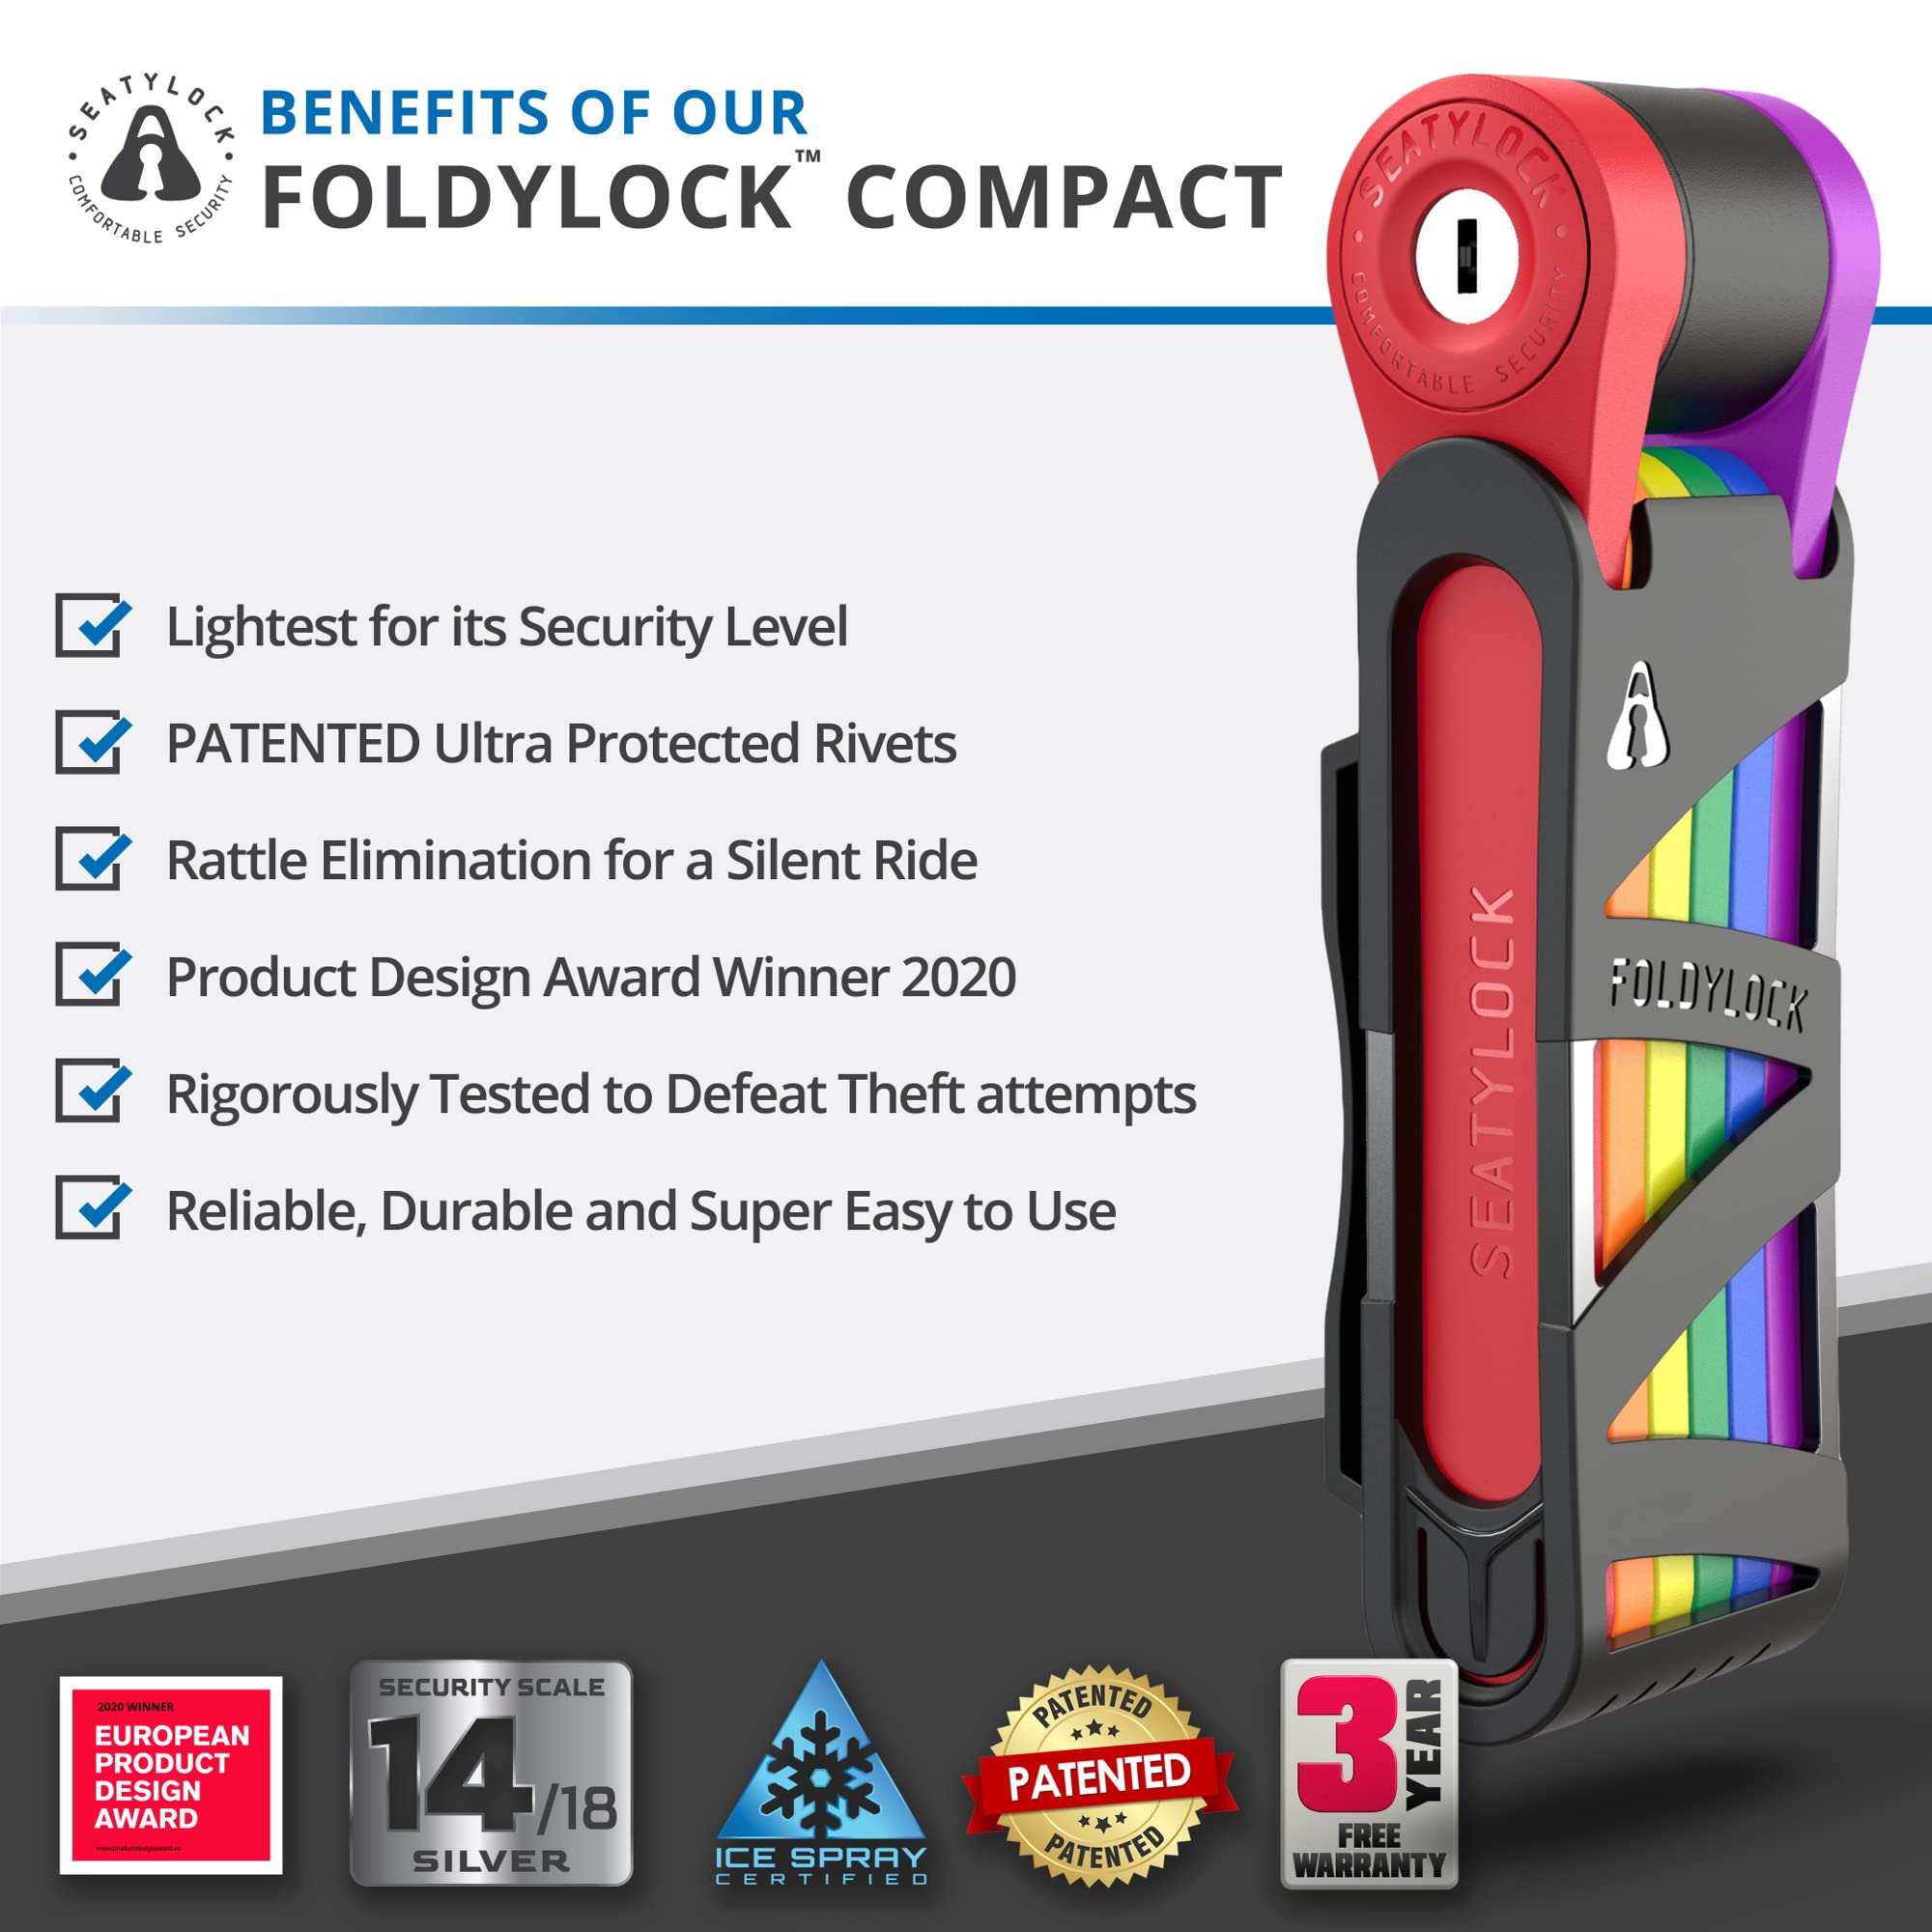 FoldyLock Compact Folding Bike Lock - Award Winning Patented Lightweight High Security Bicycle Lock - Heavy Duty Anti Theft Smart Secure Guard with Key and Case for Bikes or Scooter - 85 cm